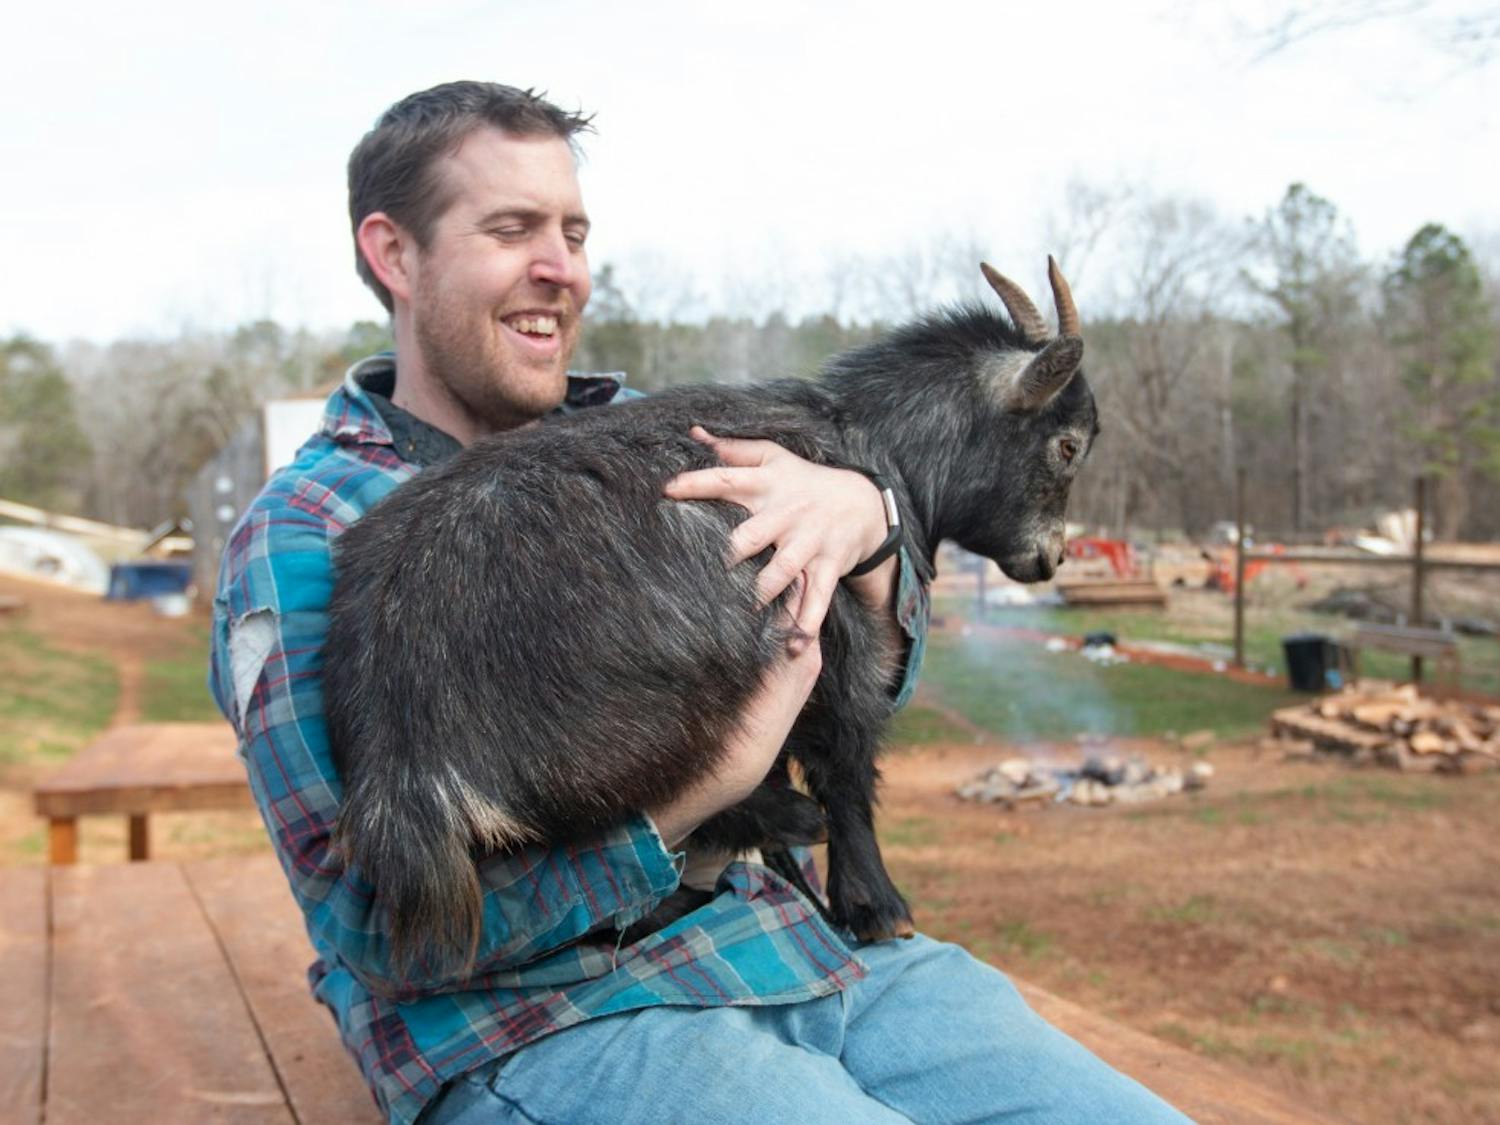 All photos are from the Valentines Day with Goats event at Spring Haven Farm in Chapel Hill on Feb. 9, 2019. All photos are taken by Dustin Duong.&nbsp;